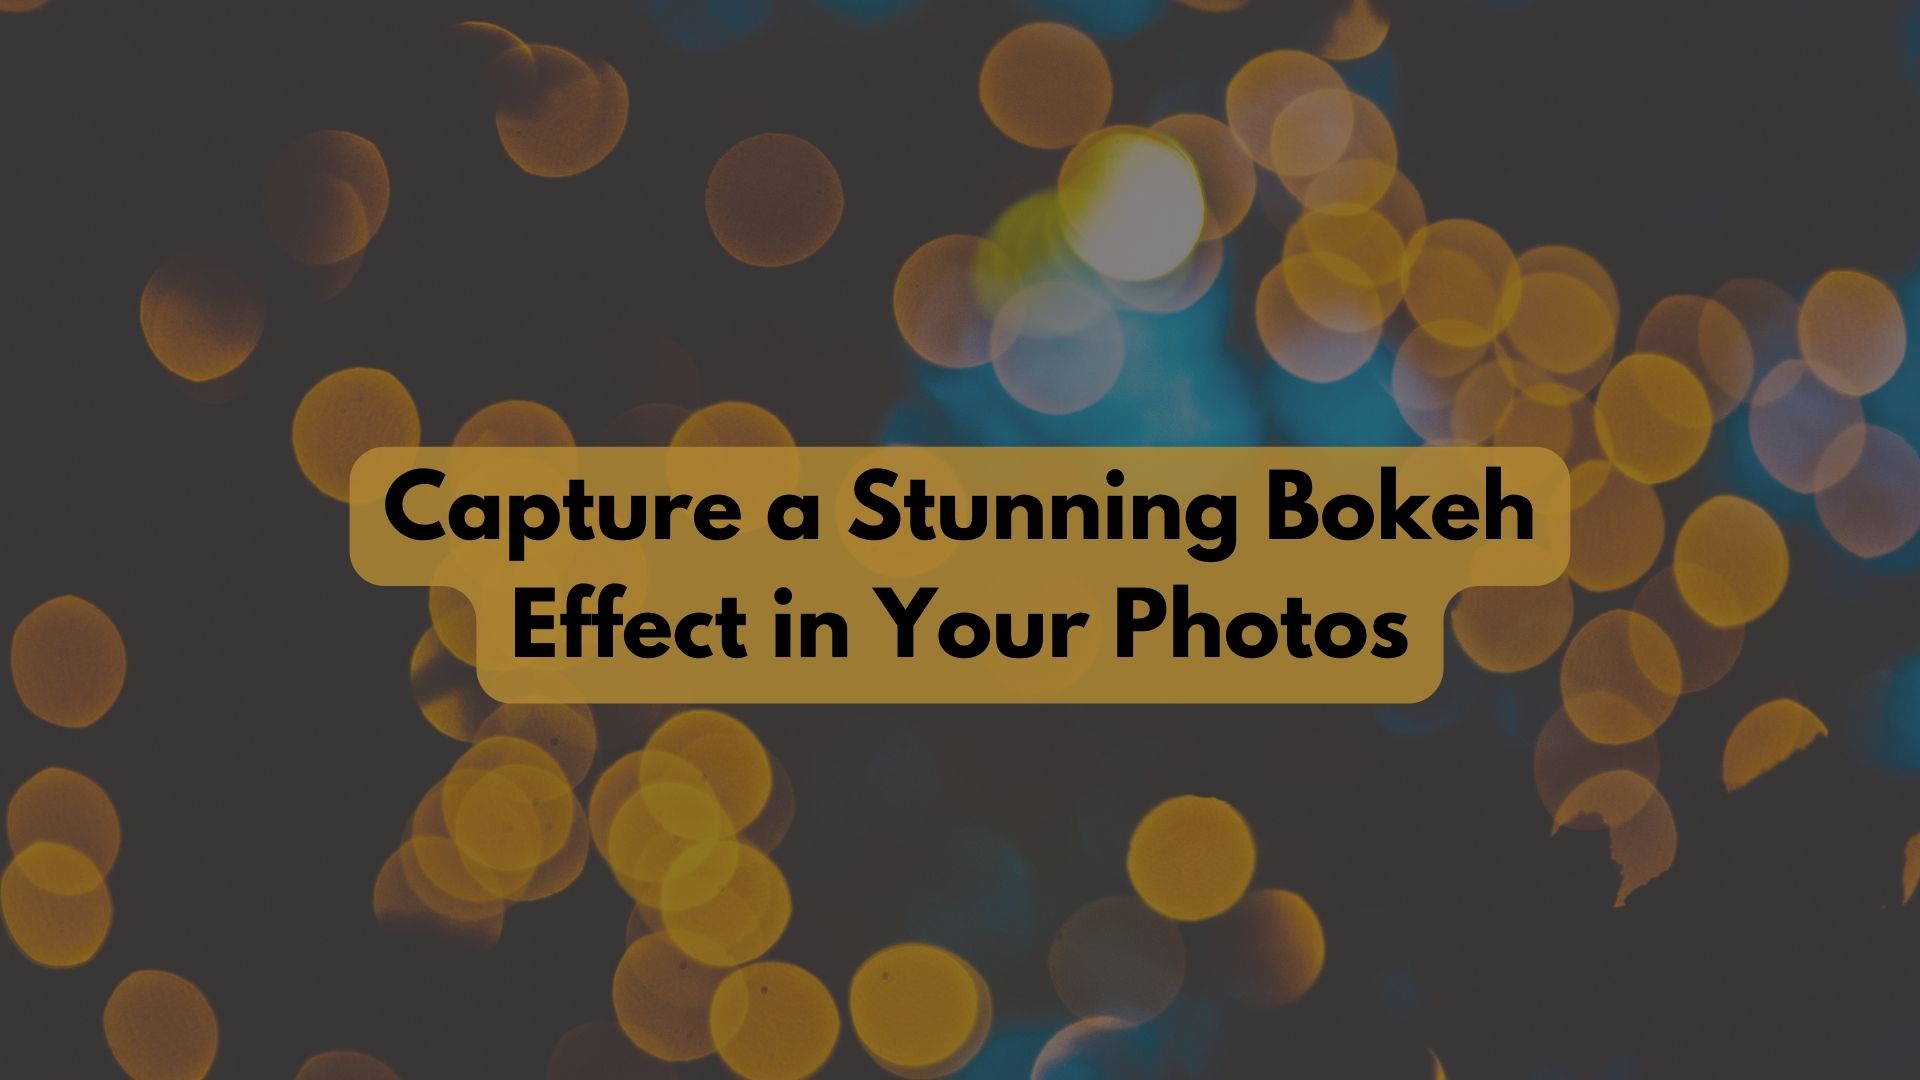 How to Capture a Stunning Bokeh Effect in Your Photos?